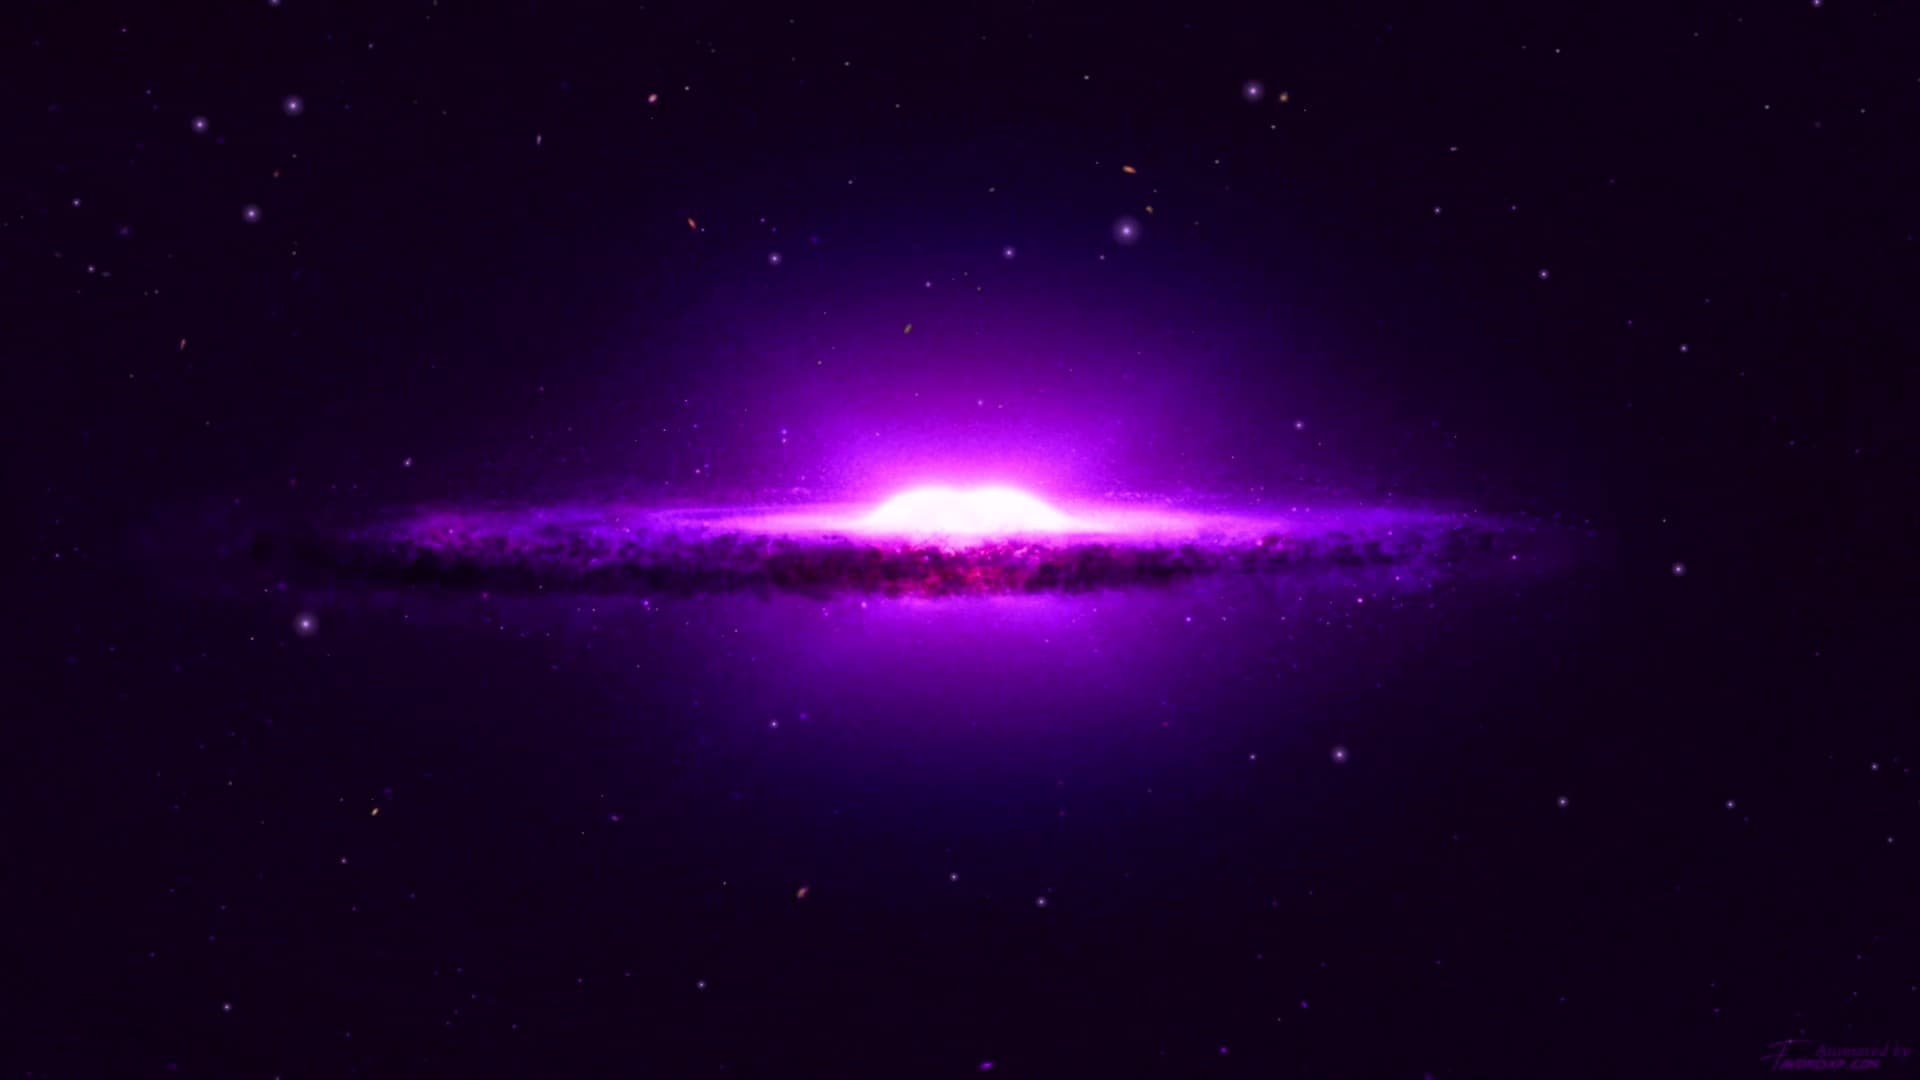 The Milky Way live wallpaper for PC by Favorisxp on DeviantArt